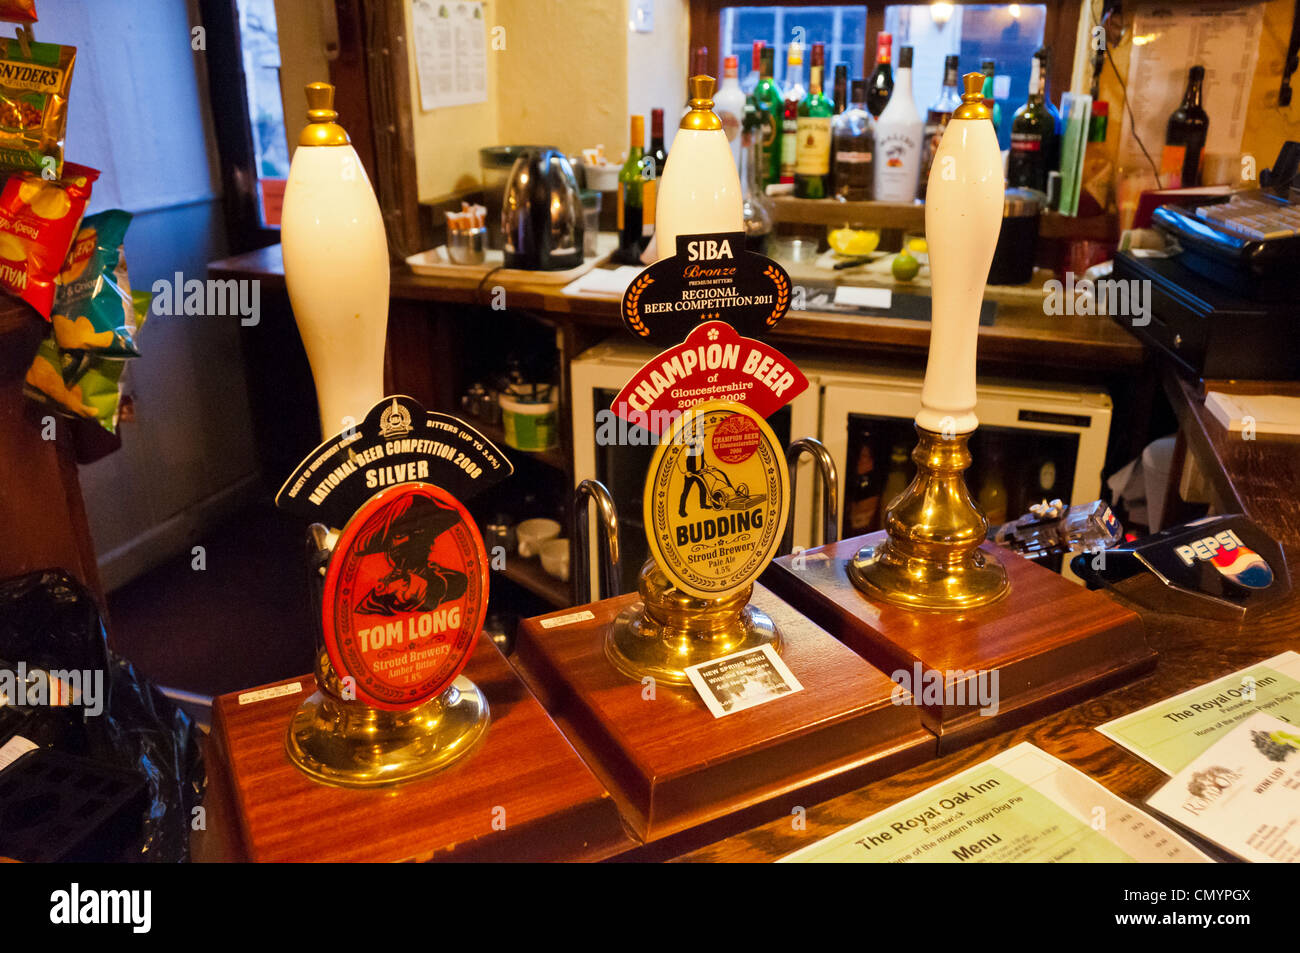 Beer pumps of Budding (pale ale) and Tom Long (amber bitter) in pub, Gloucestershire, UK Stock Photo